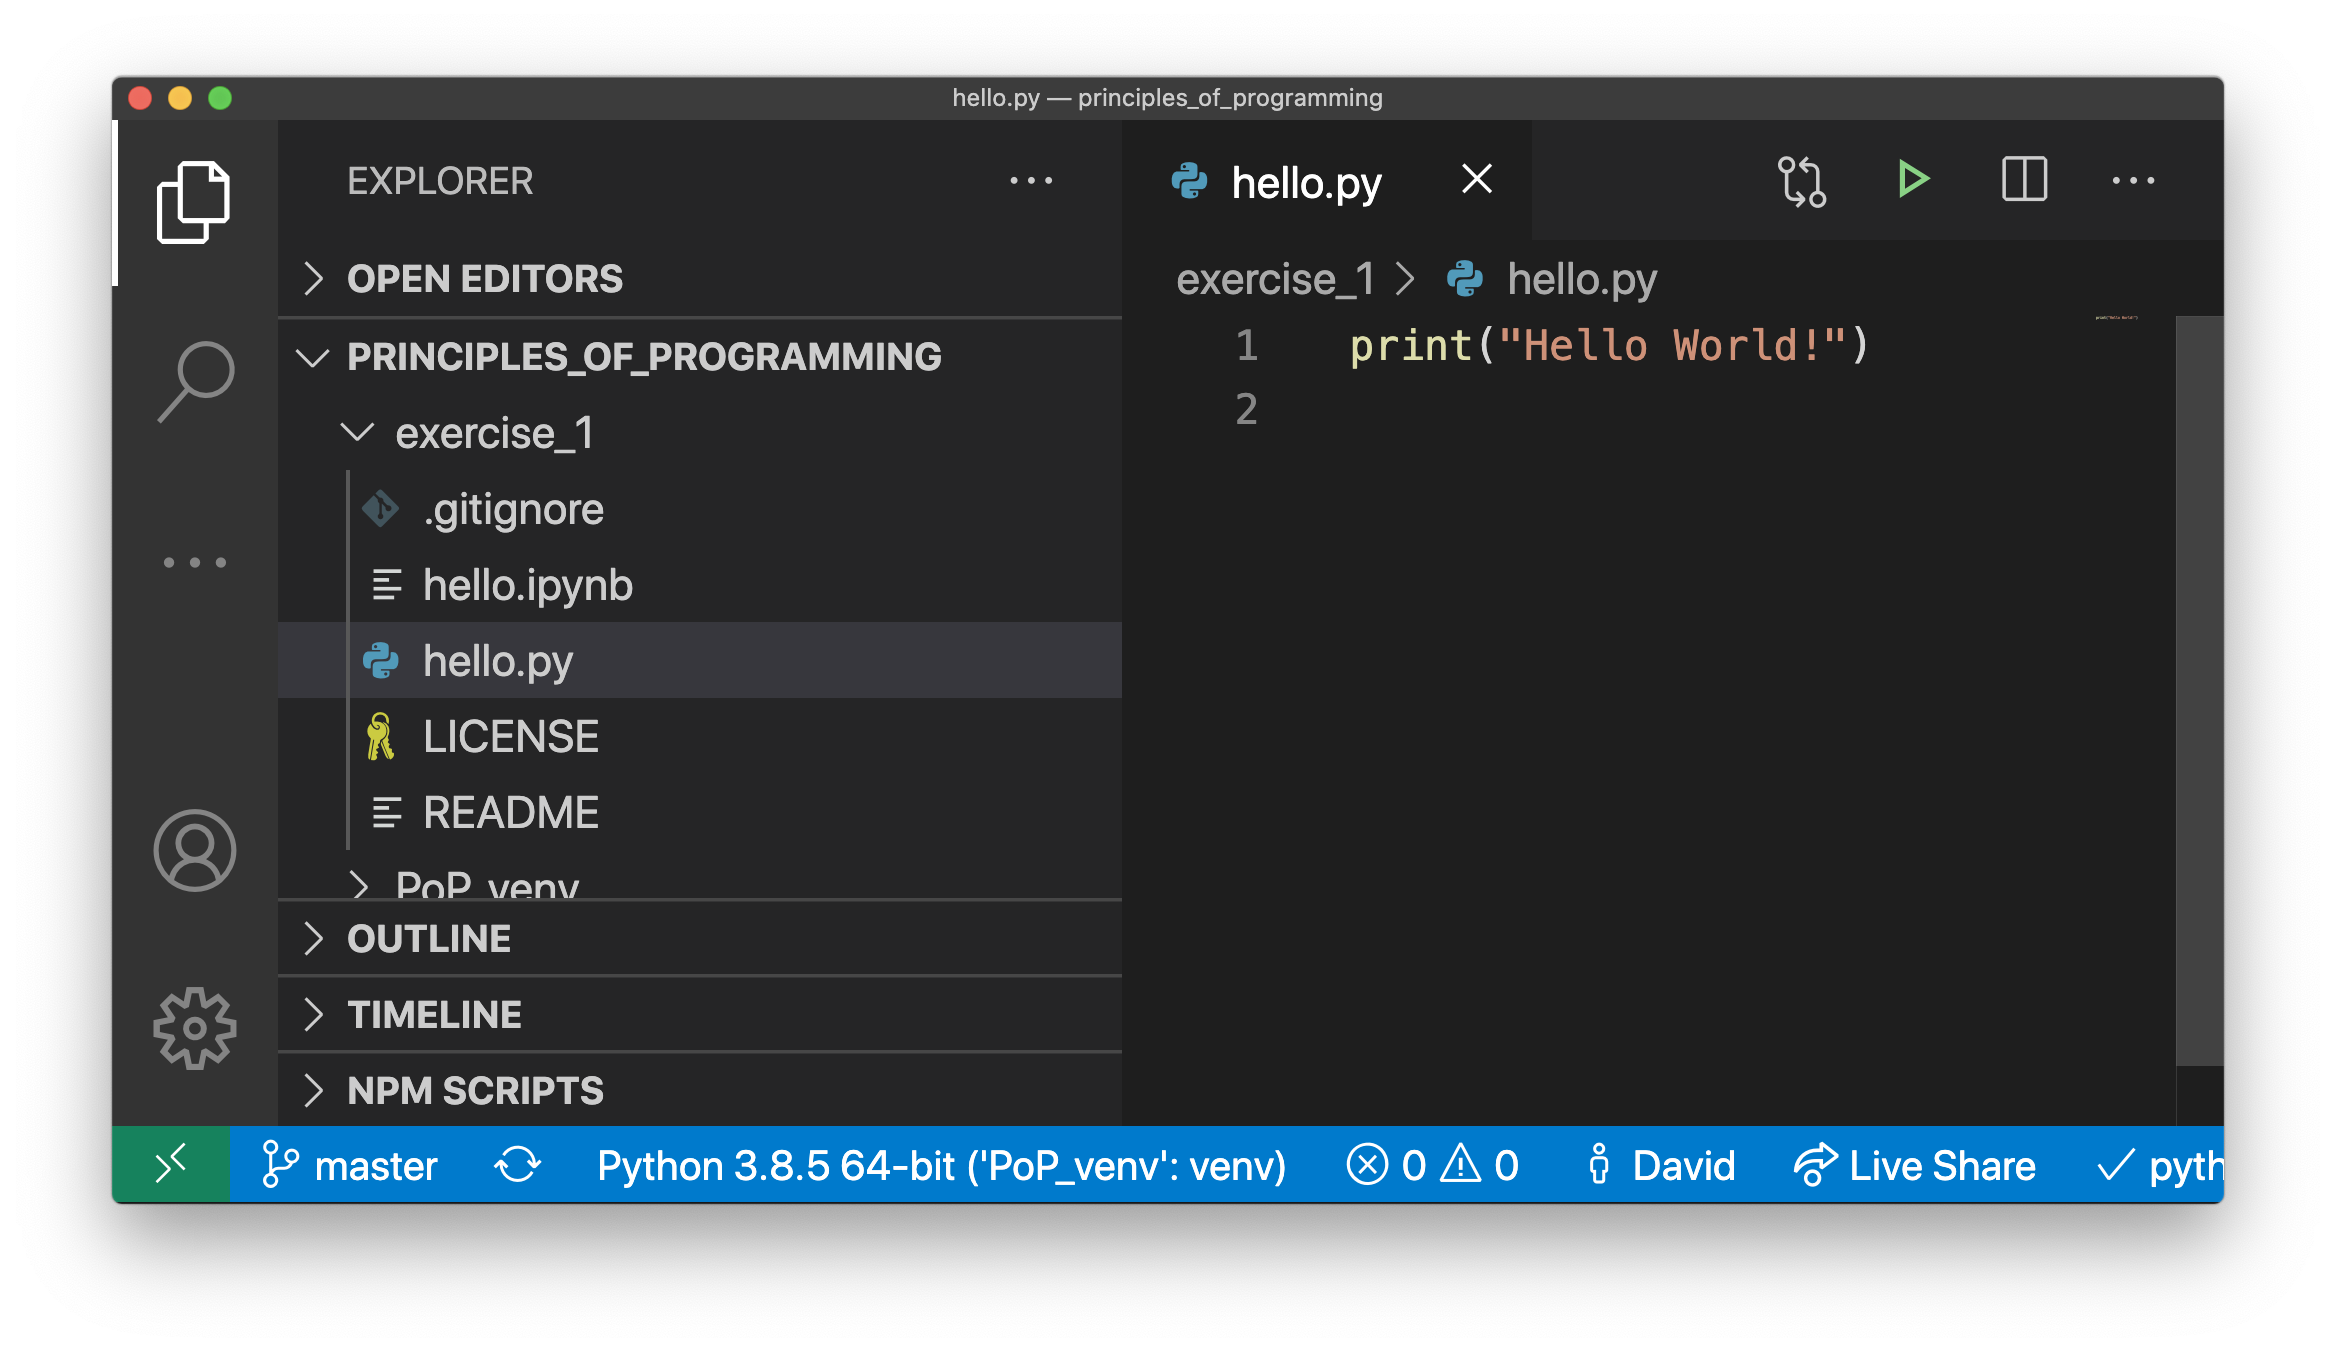 _images/vscode_hello_py.png